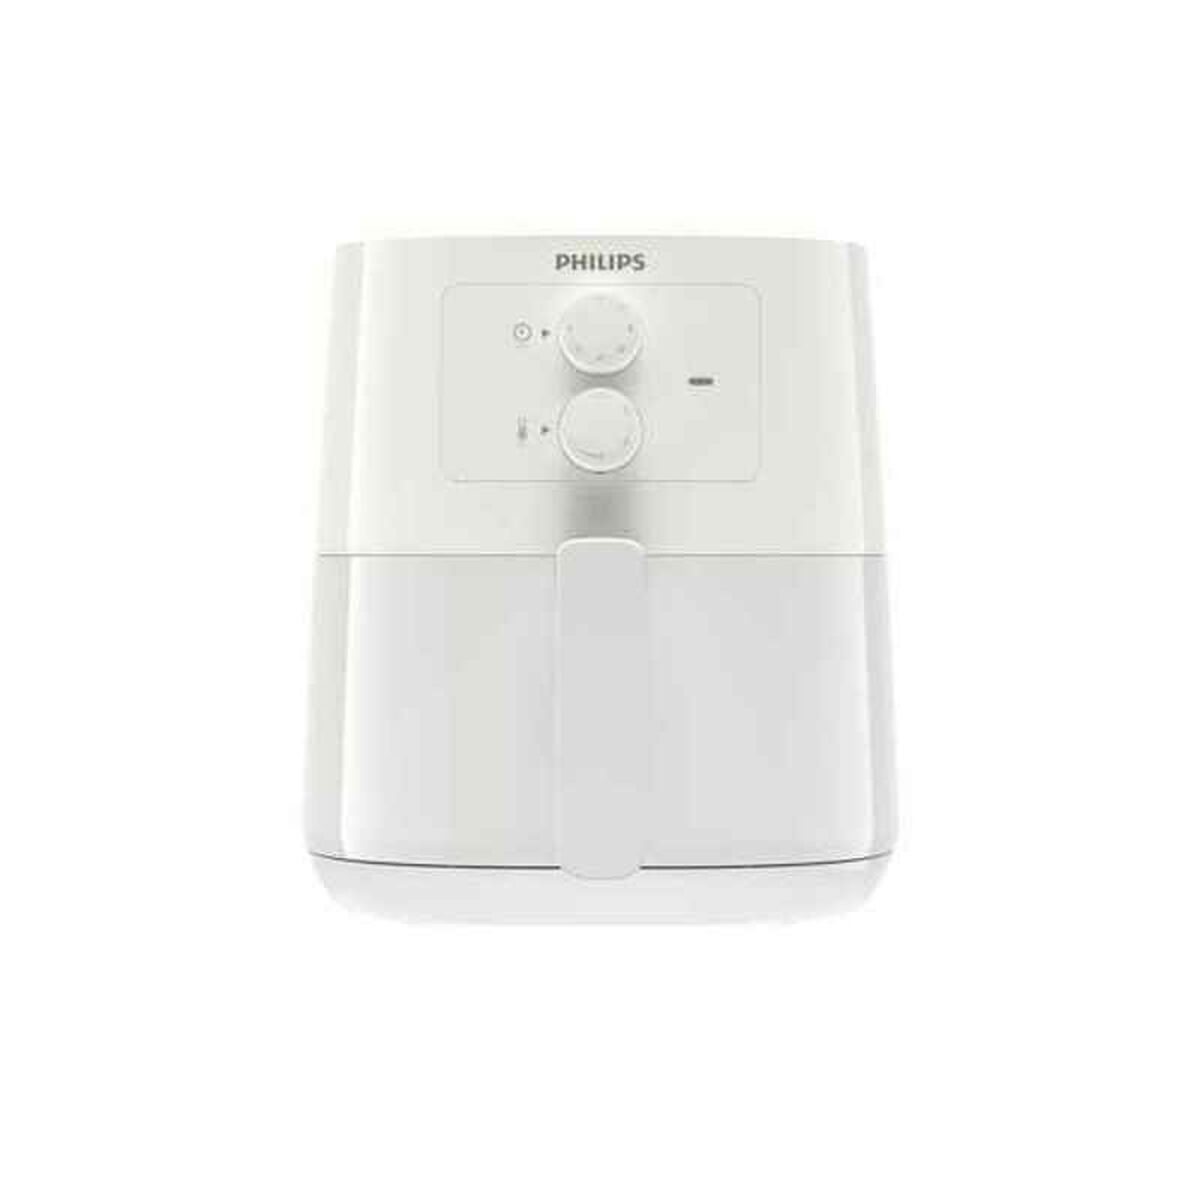 Luchtfriteuse Philips HD9200/10 Wit 4,1 L 1400 W 50 W